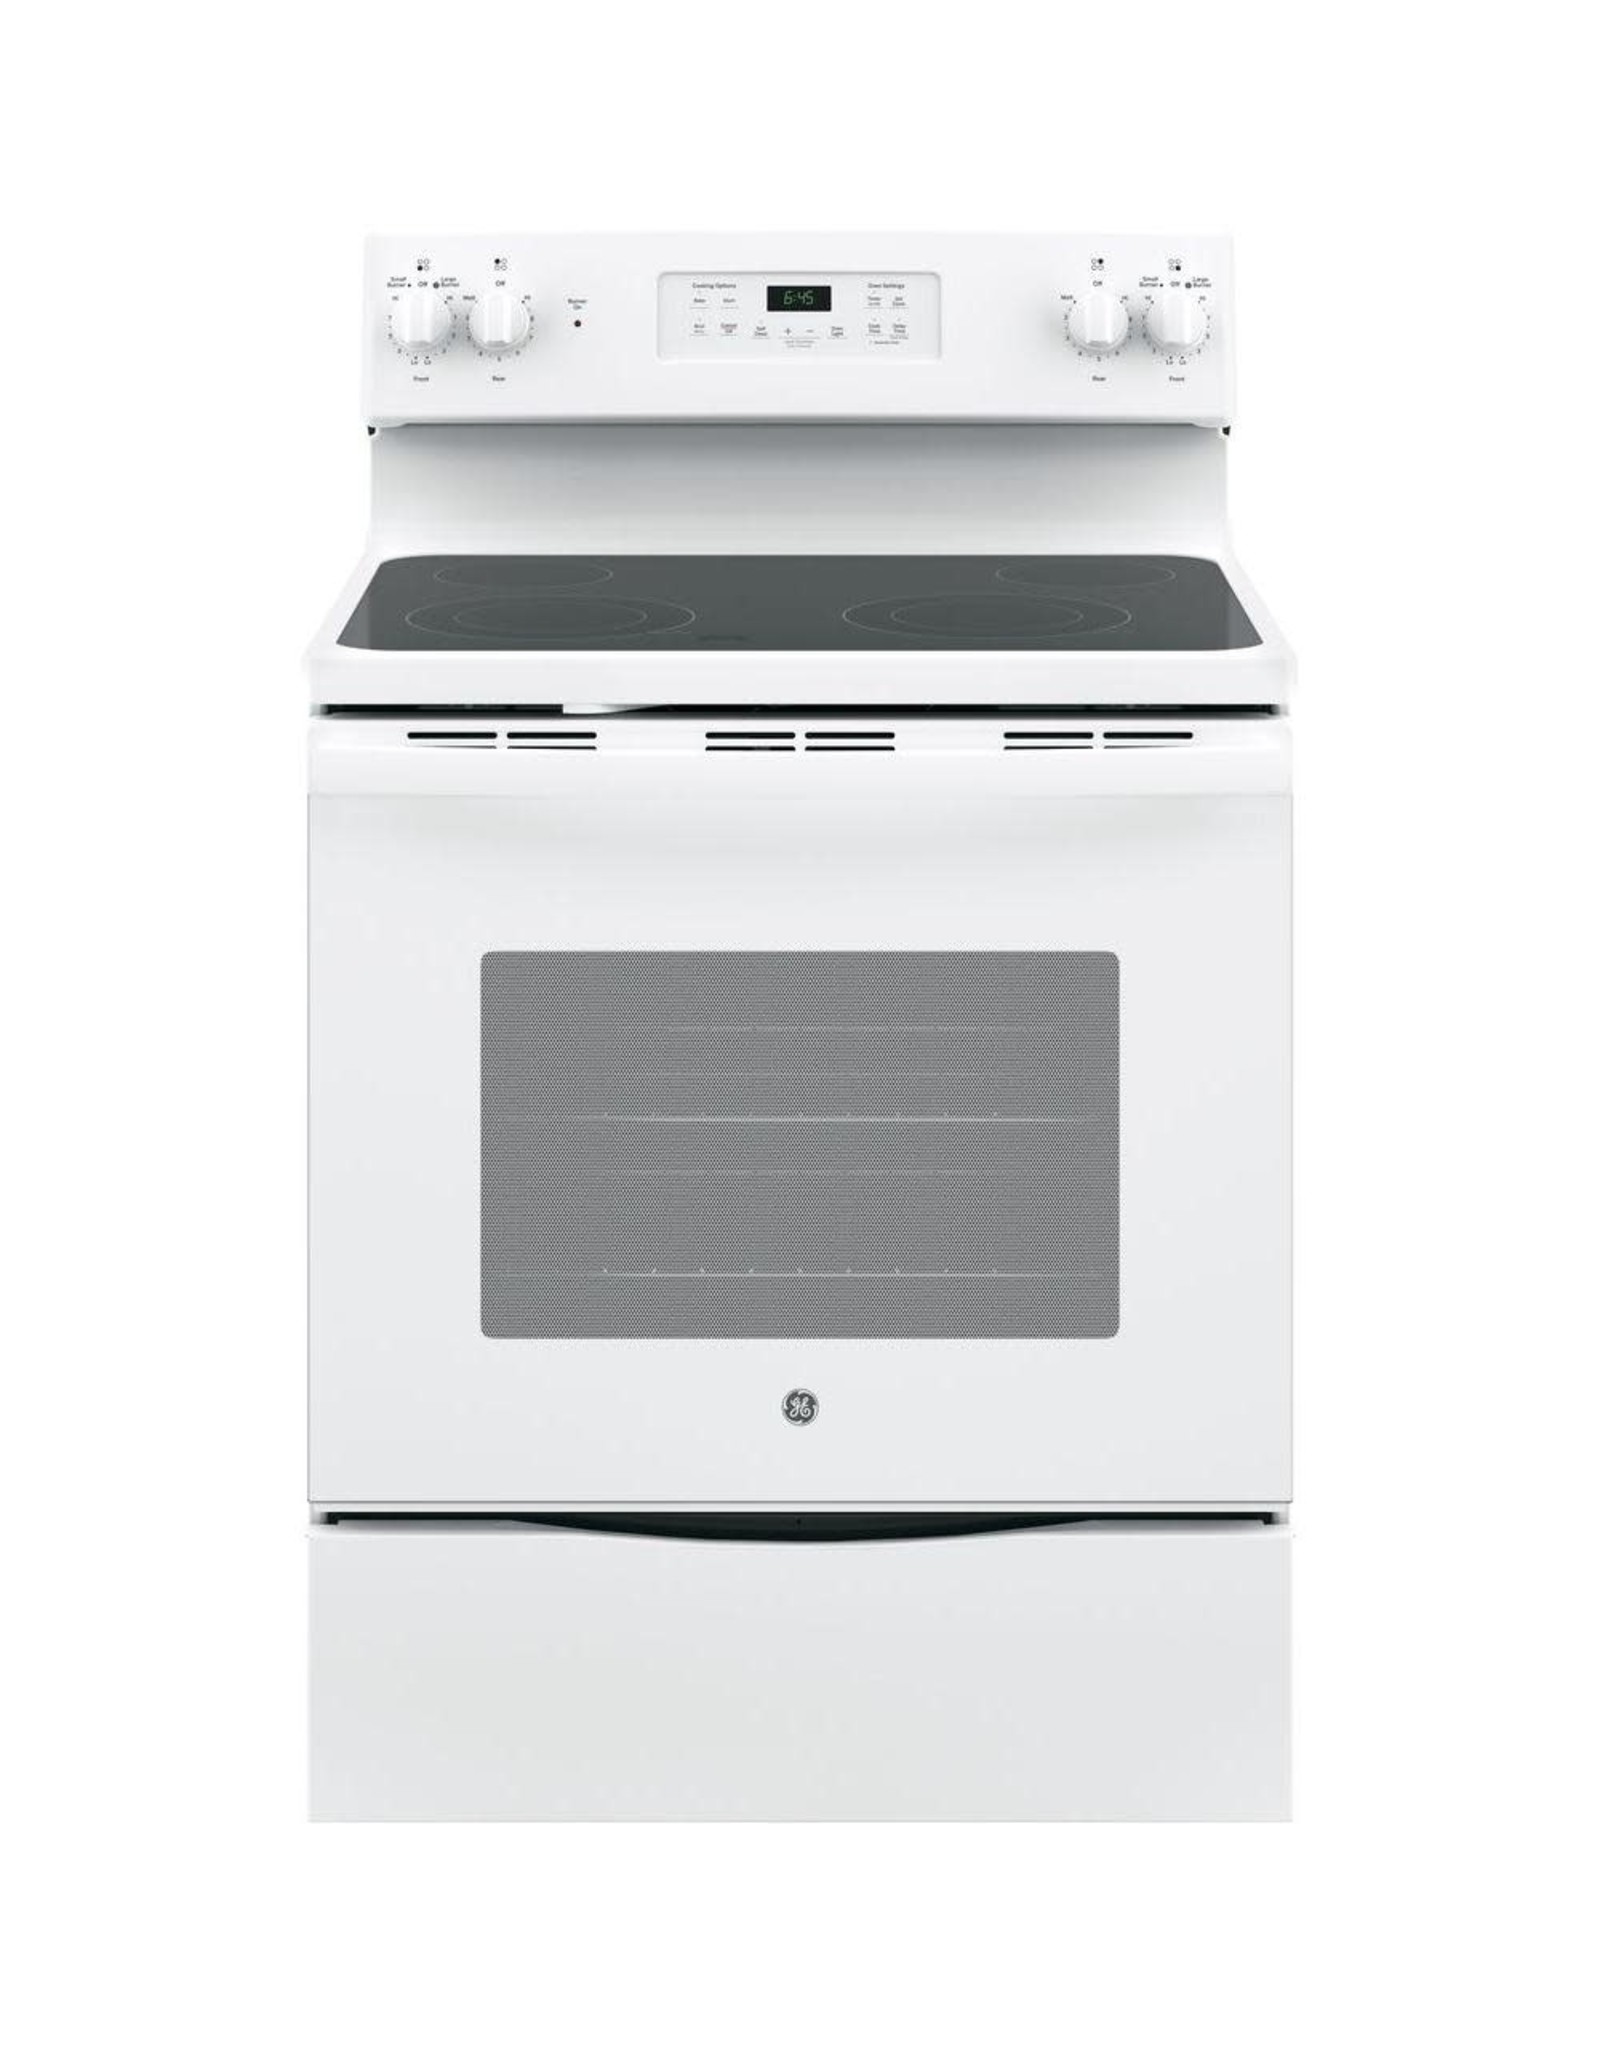 GE JB645DKWW GE 30 in. 5.3 cu. ft. Electric Range with Self-Cleaning Oven in White